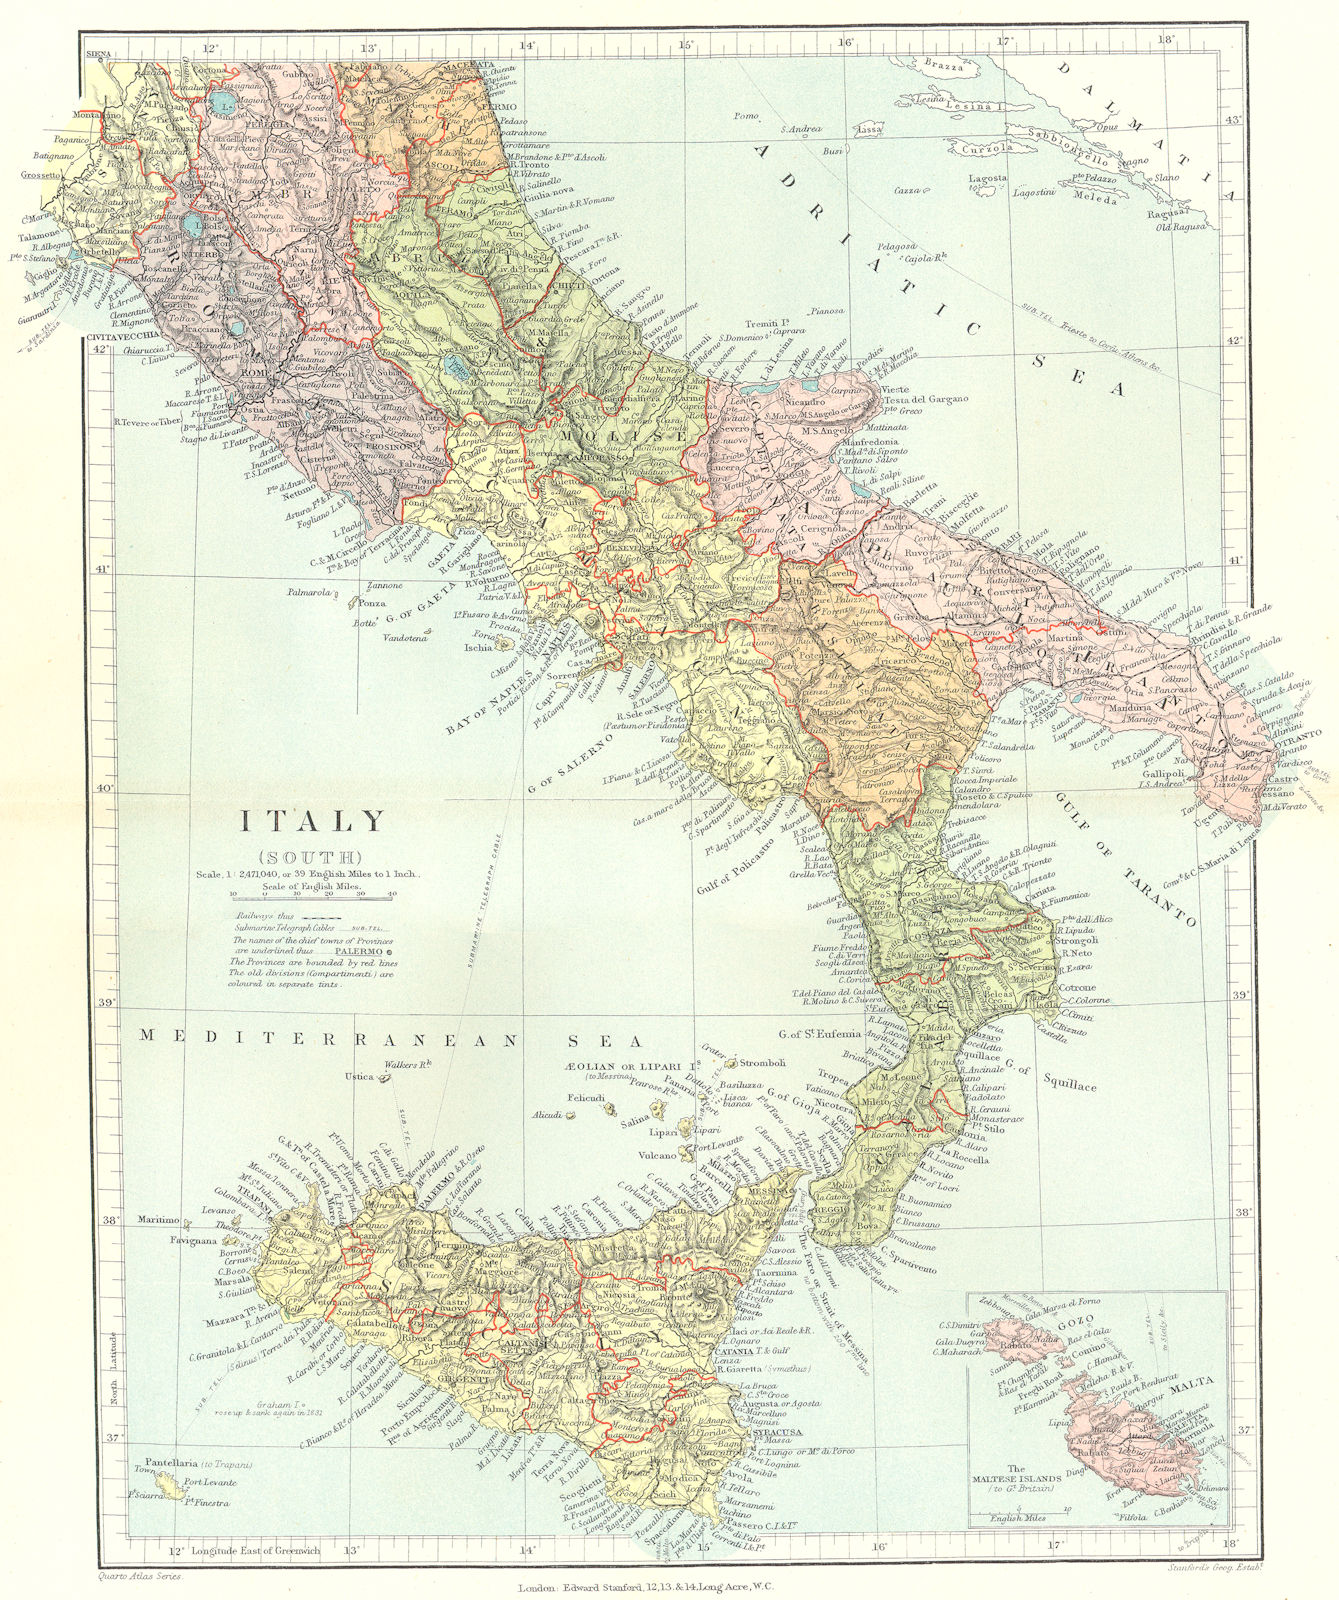 SOUTHERN ITALY. Showing provinces & compartmenti. Inset Malta.STANFORD 1906 map